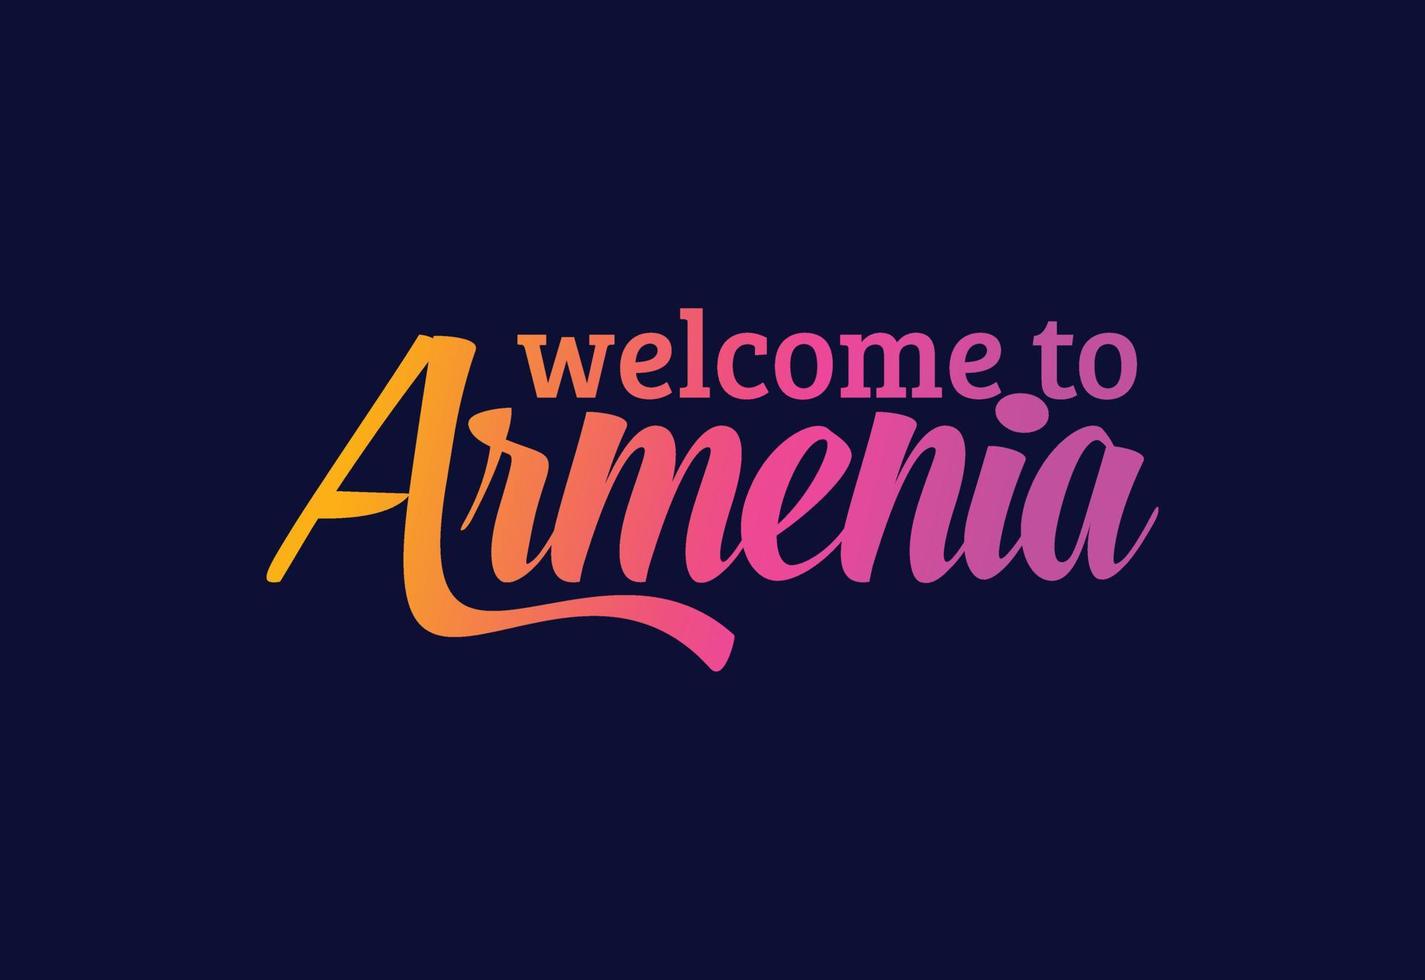 Welcome To Armenia Word Text Creative Font Design Illustration. Welcome sign vector